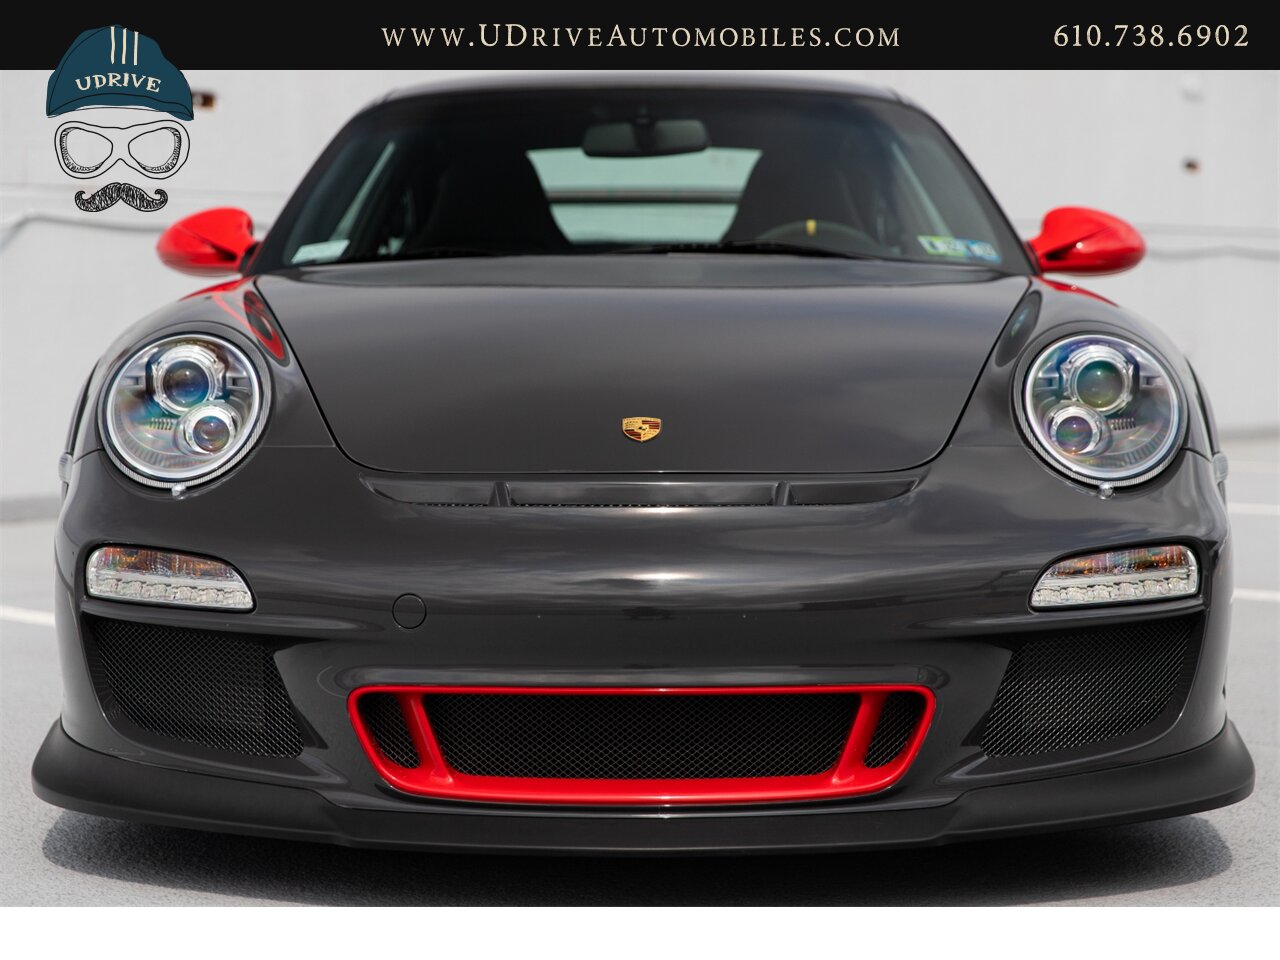 2010 Porsche 911 GT3 RS 1k Miles Dev Red Stitching Throughout  Front Axle Lift Sport Chrono 997.2 - Photo 15 - West Chester, PA 19382